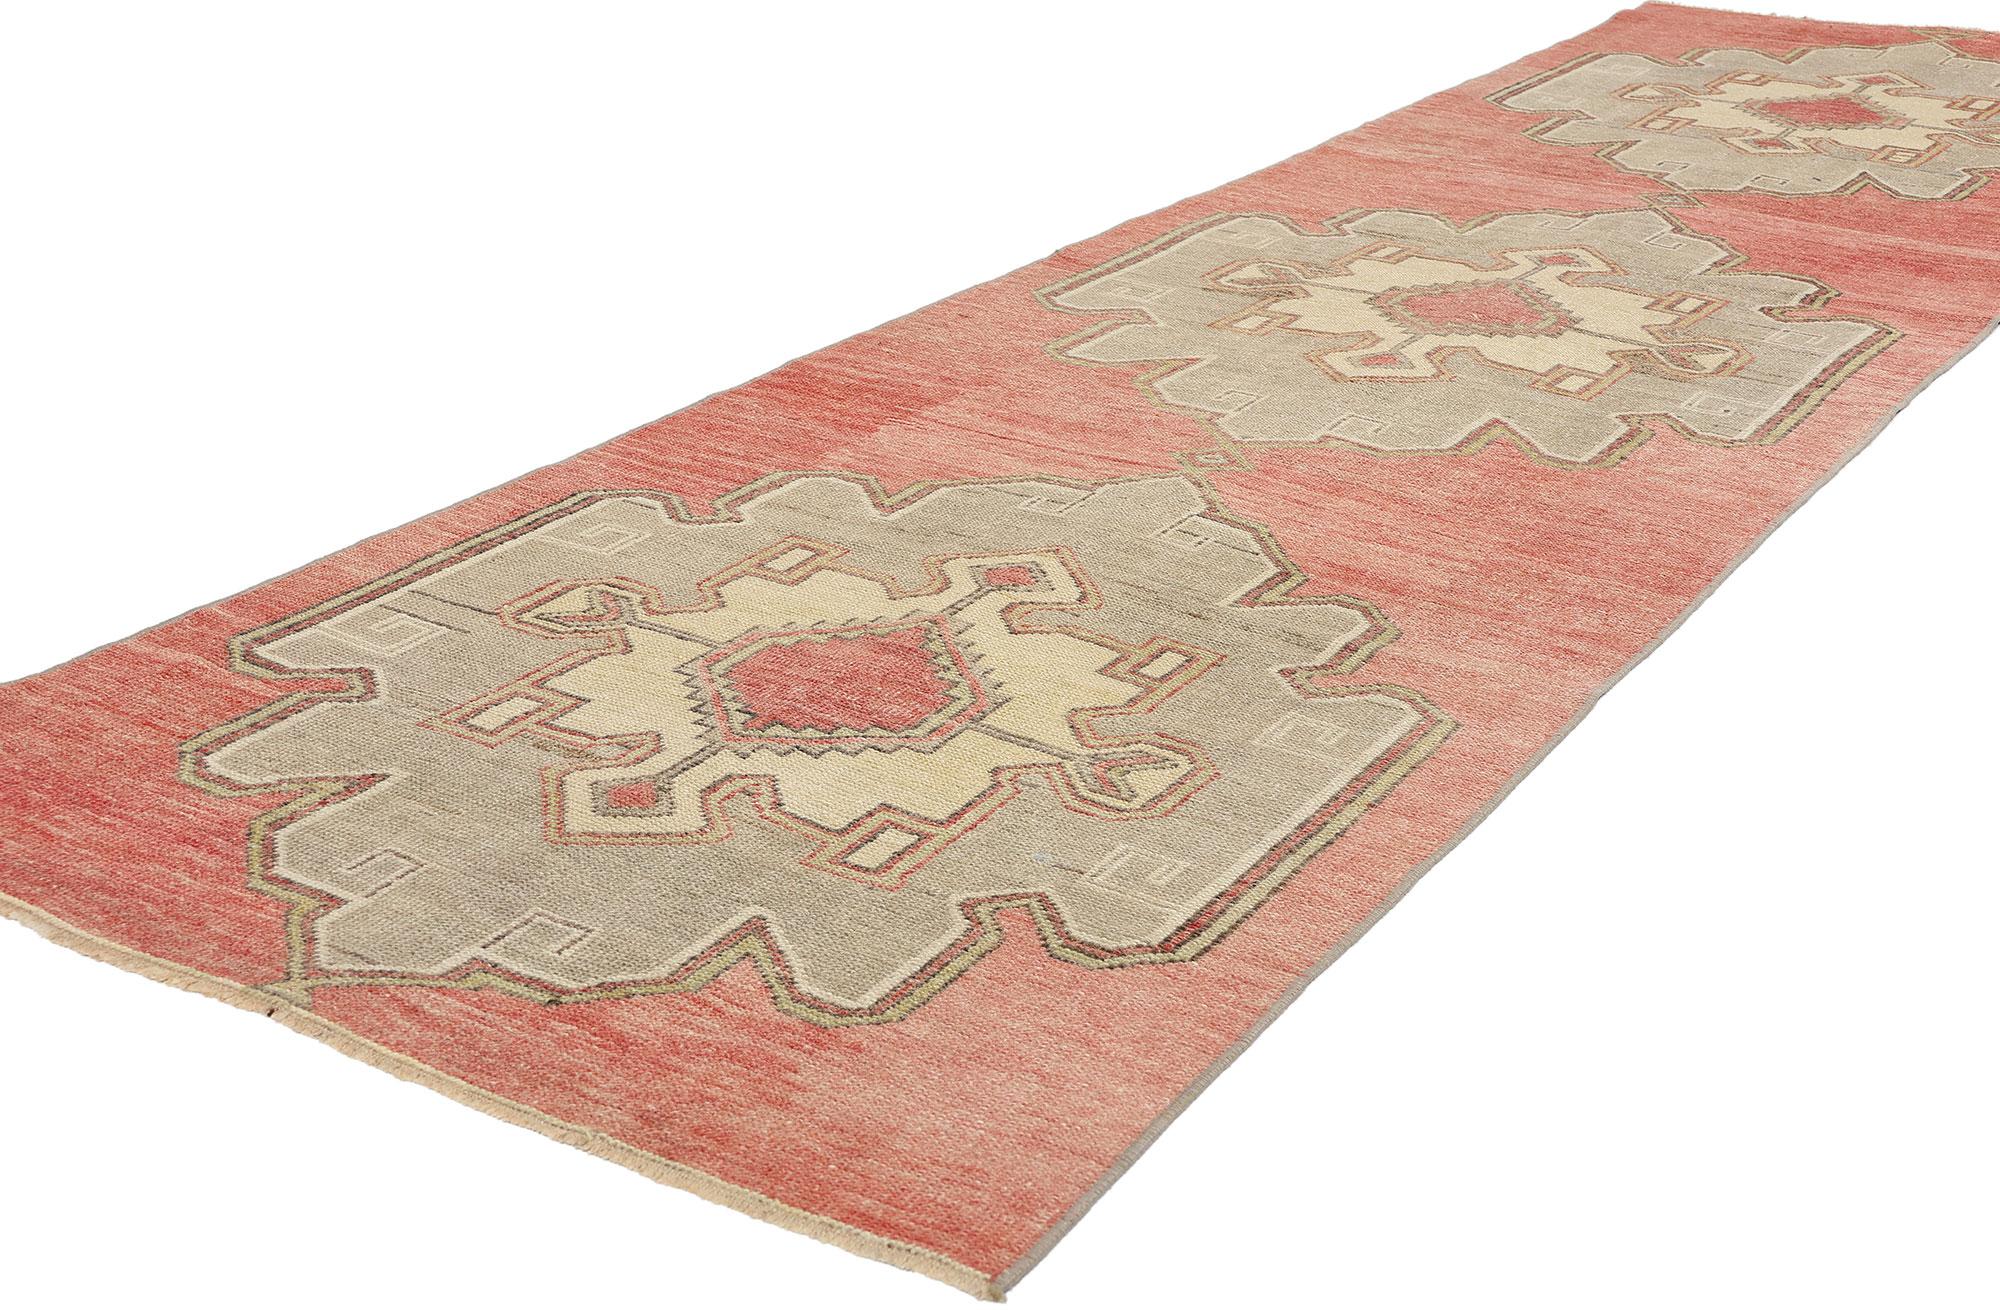 53915 Vintage Red Turkish Oushak Rug Runner, 03'02 x 11'05. Please note this listing is for one piece. There is a matching piece available adds to its rarity. Hailing from the Oushak region in western Turkey, Turkish Oushak carpet runners are